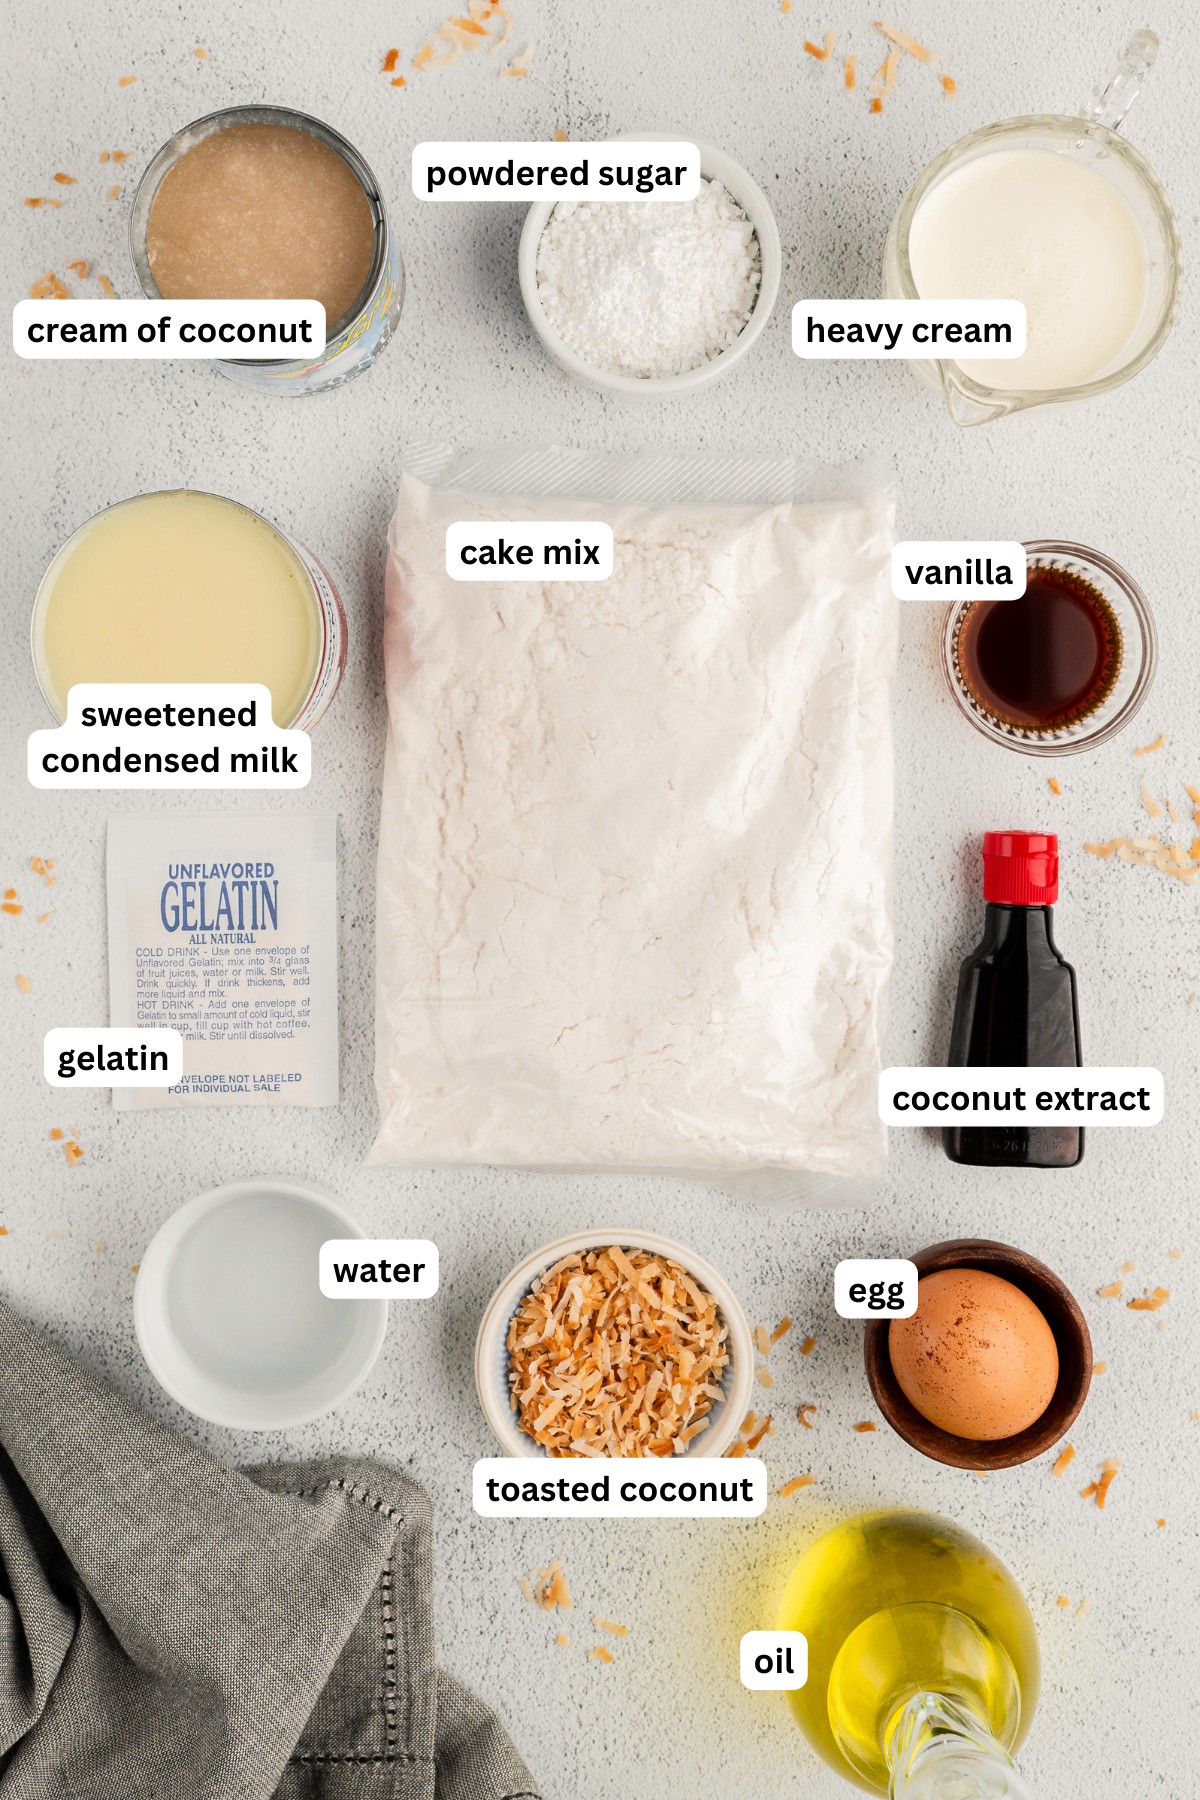 Ingredients for coconut poke cake recipe arranged on a countertop. From top to bottom: cream of coconut, powdered sugar, heavy cream, sweetened condensed milk, cake mix, vanilla extract, gelatin, coconut extract, water, toasted coconut, egg and oil.